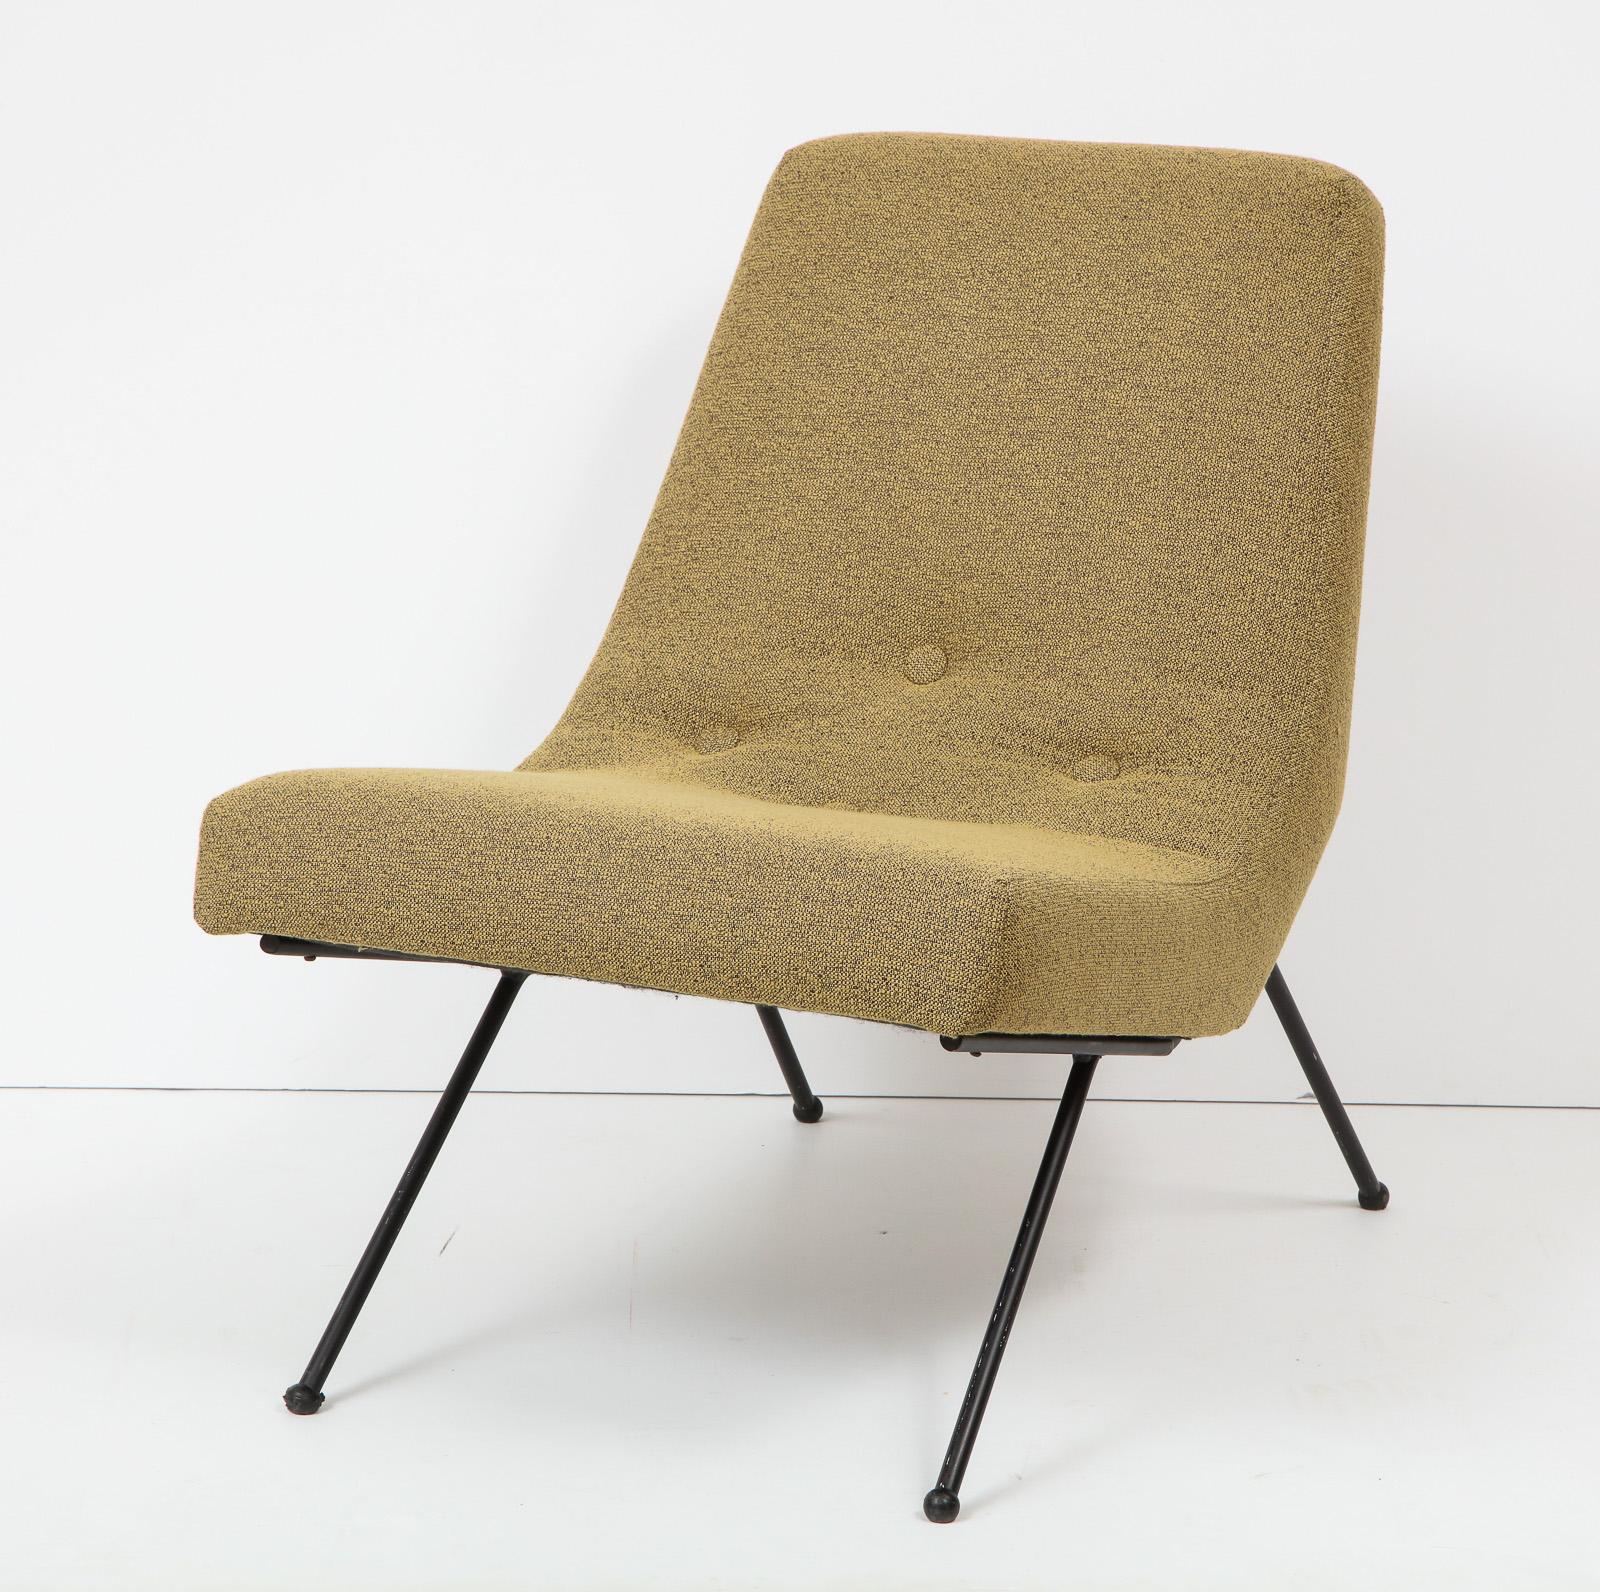 Mid-20th Century Sculptural Adrian Pearsall Lounge Chair for Craft Associates